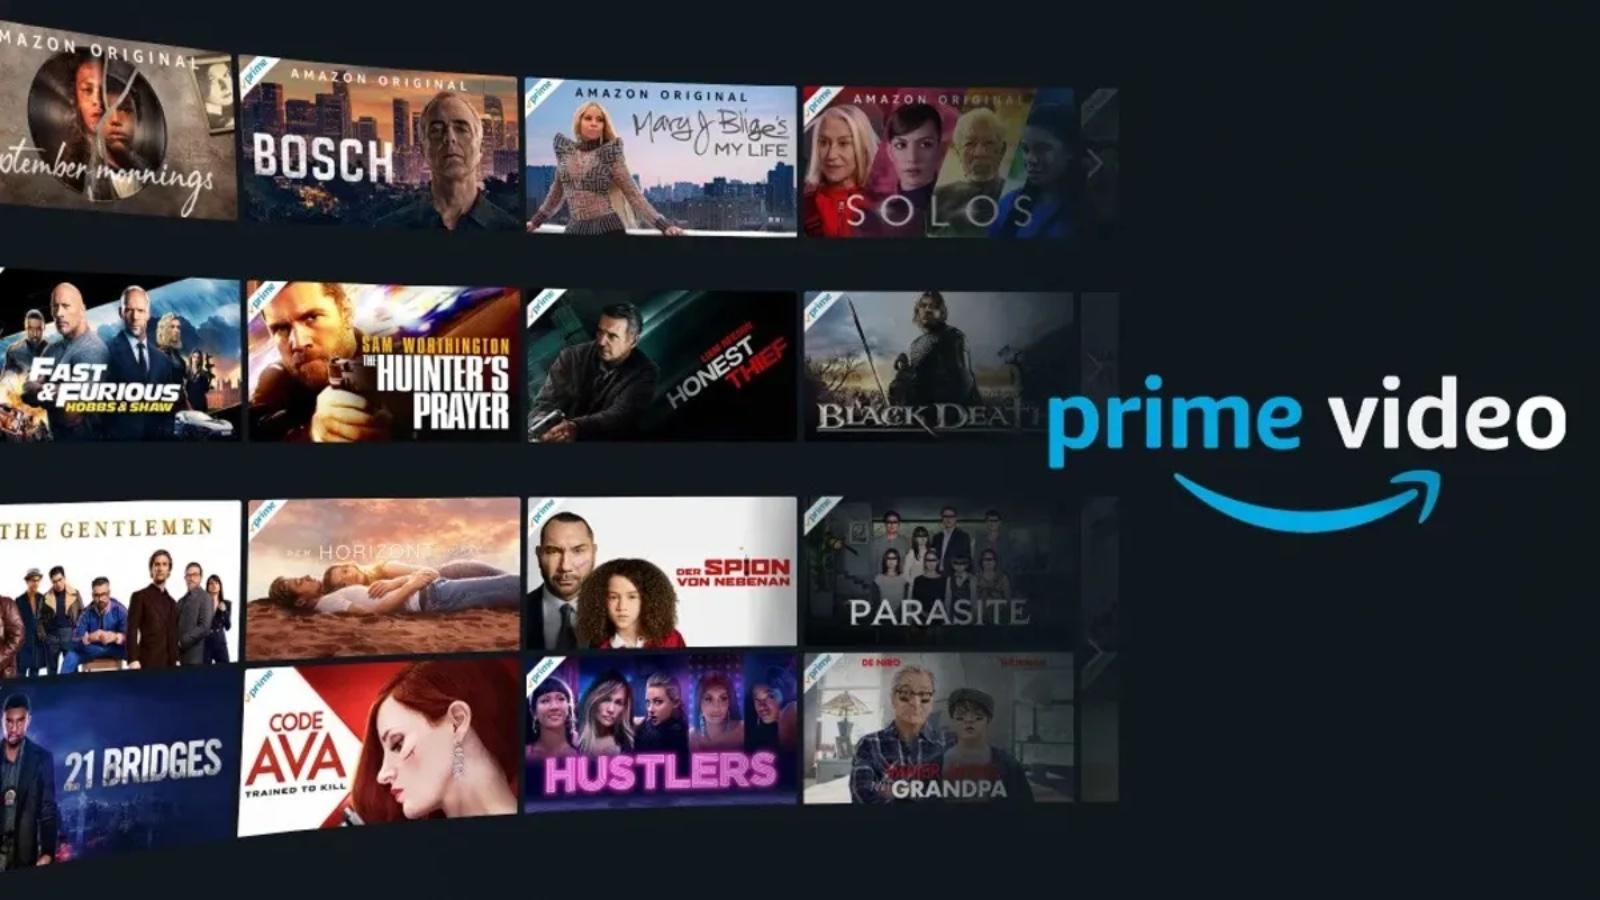 Amazon Prime Video shows and movies.